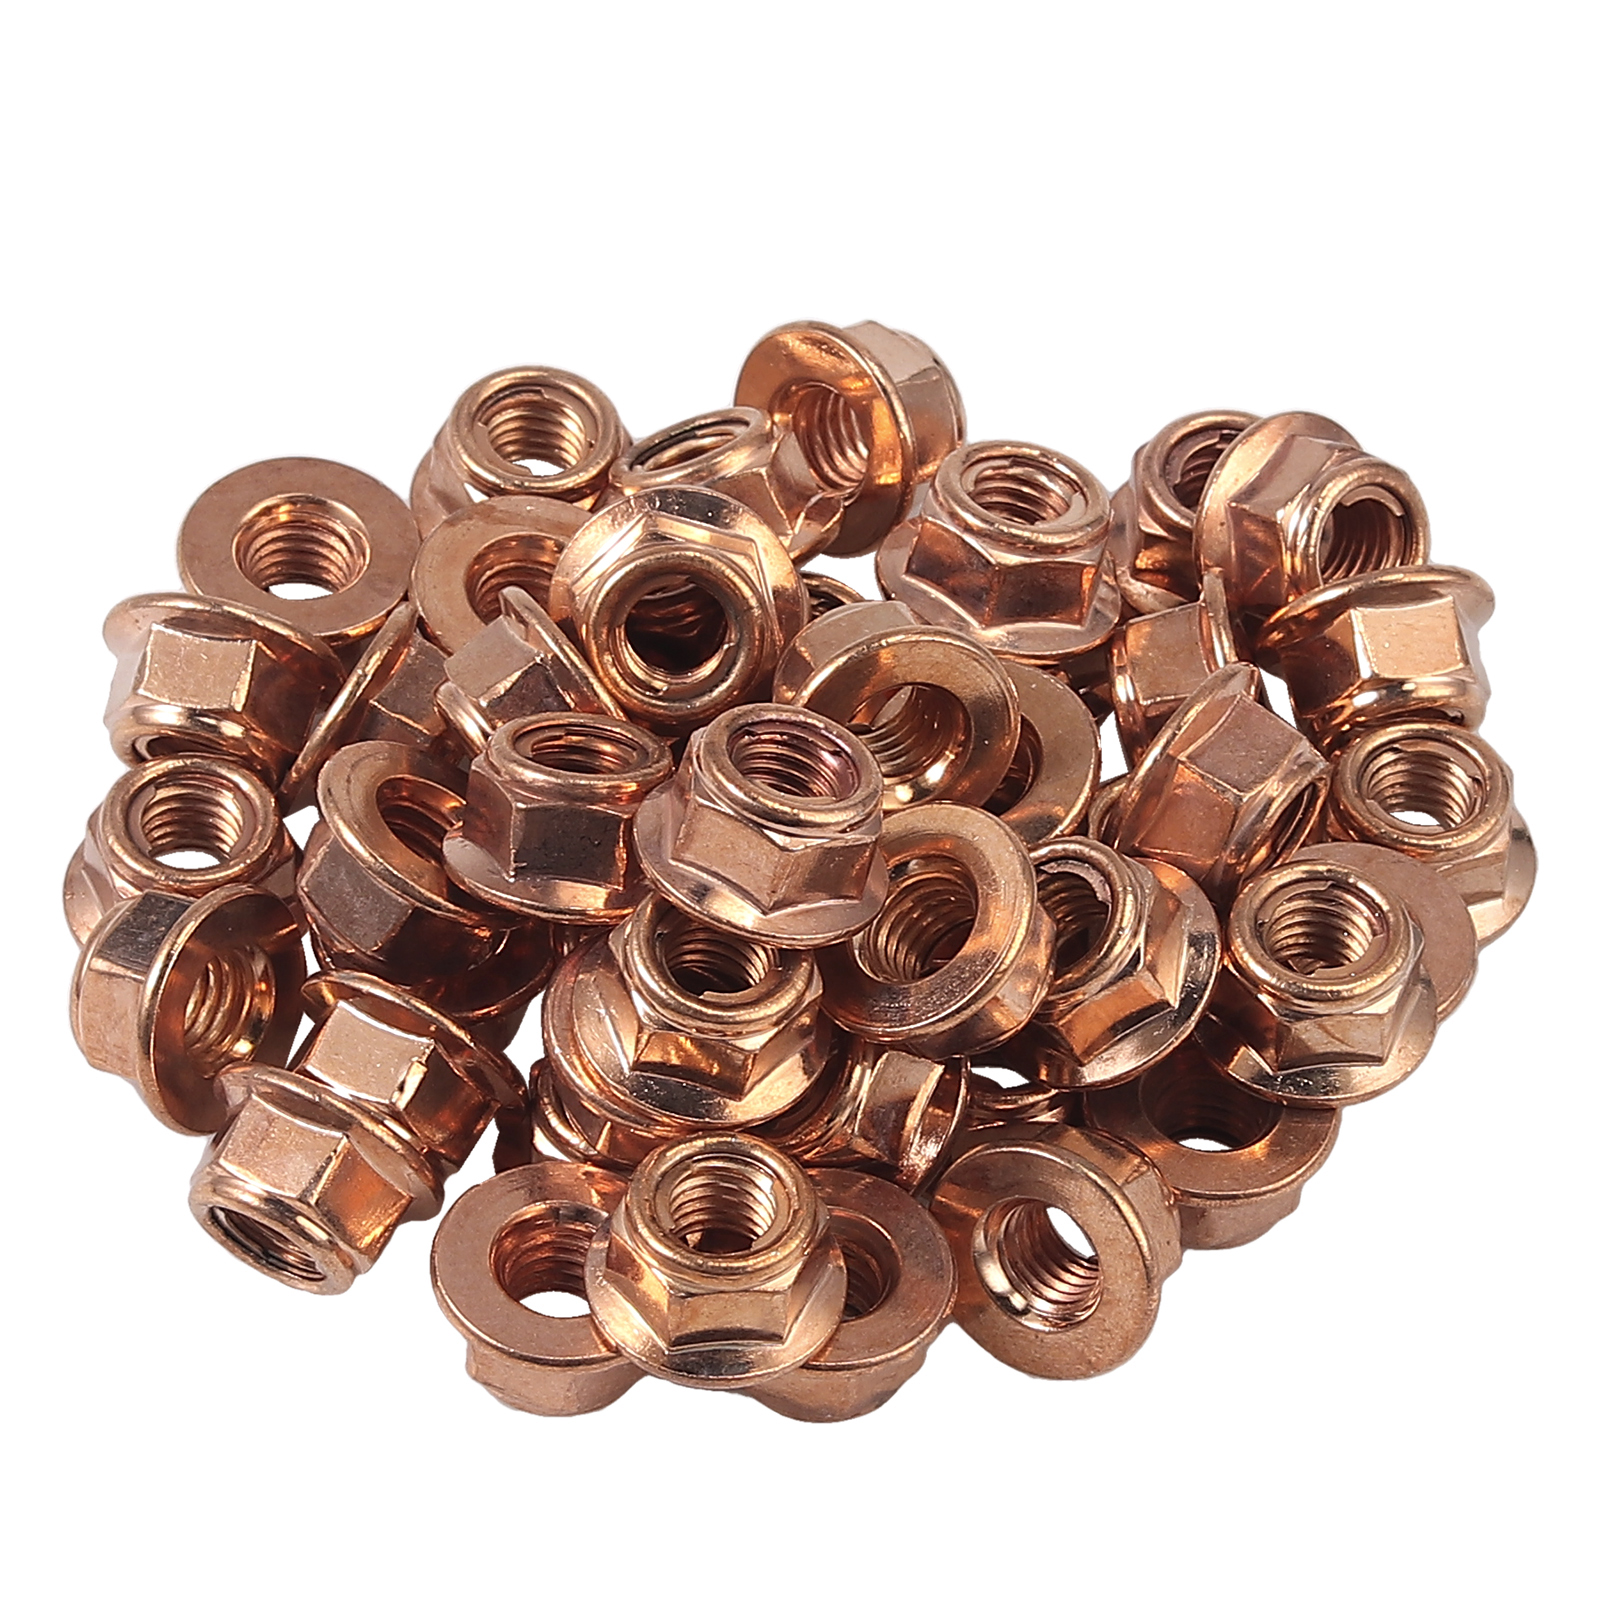 50X M8 COPPER FLASHED EXHAUST MANIFOLD NUT 8MM NUTS HIGH TEMPERATURE